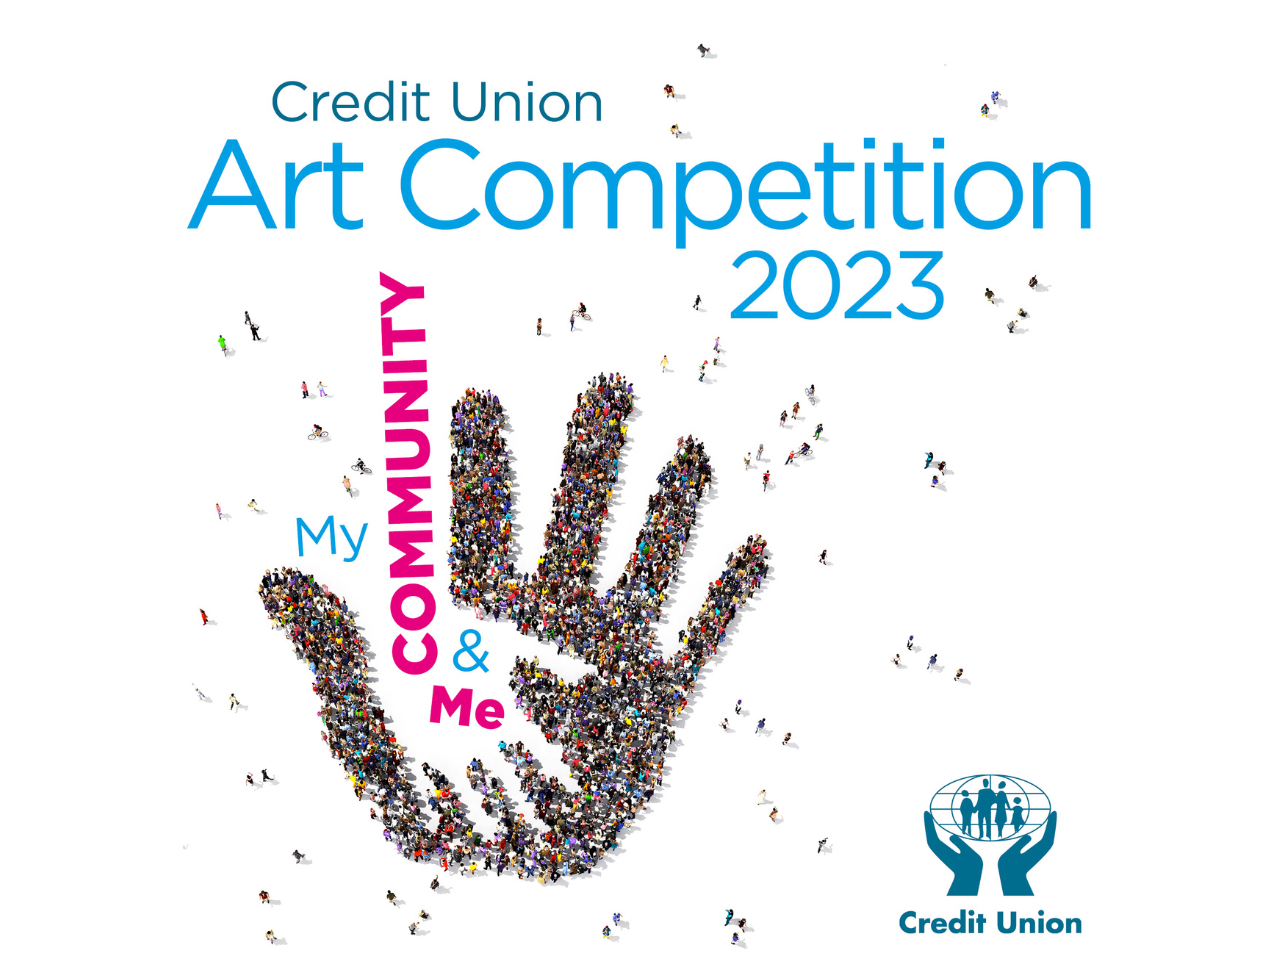 Credit Union Art Competition 2023 Launched